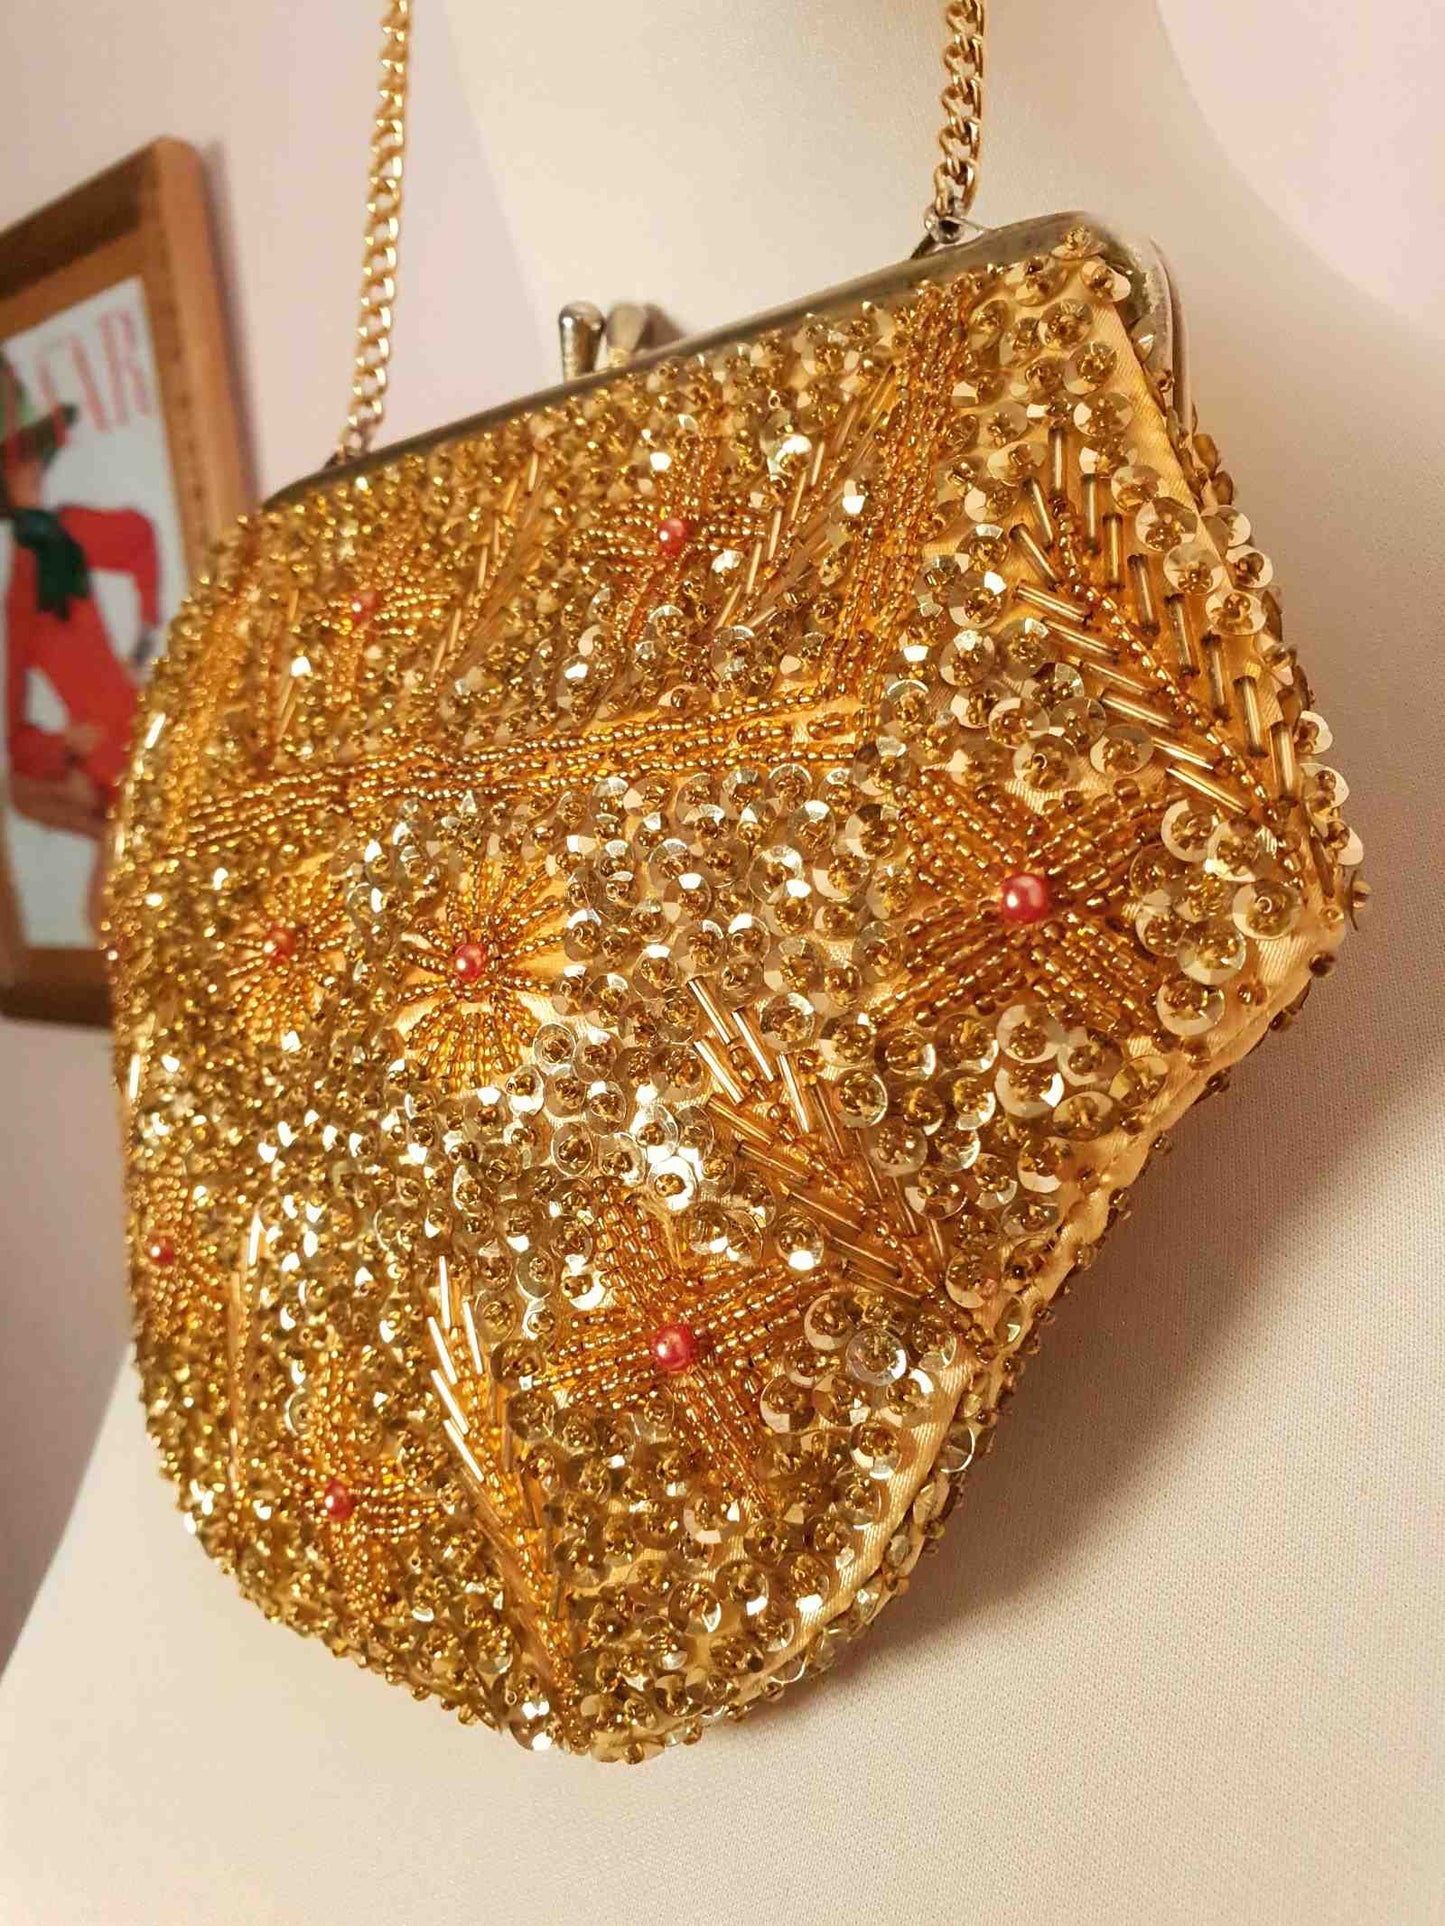 Dazzling Vintage 1960s Gold Bead and Sequin Evening Bag